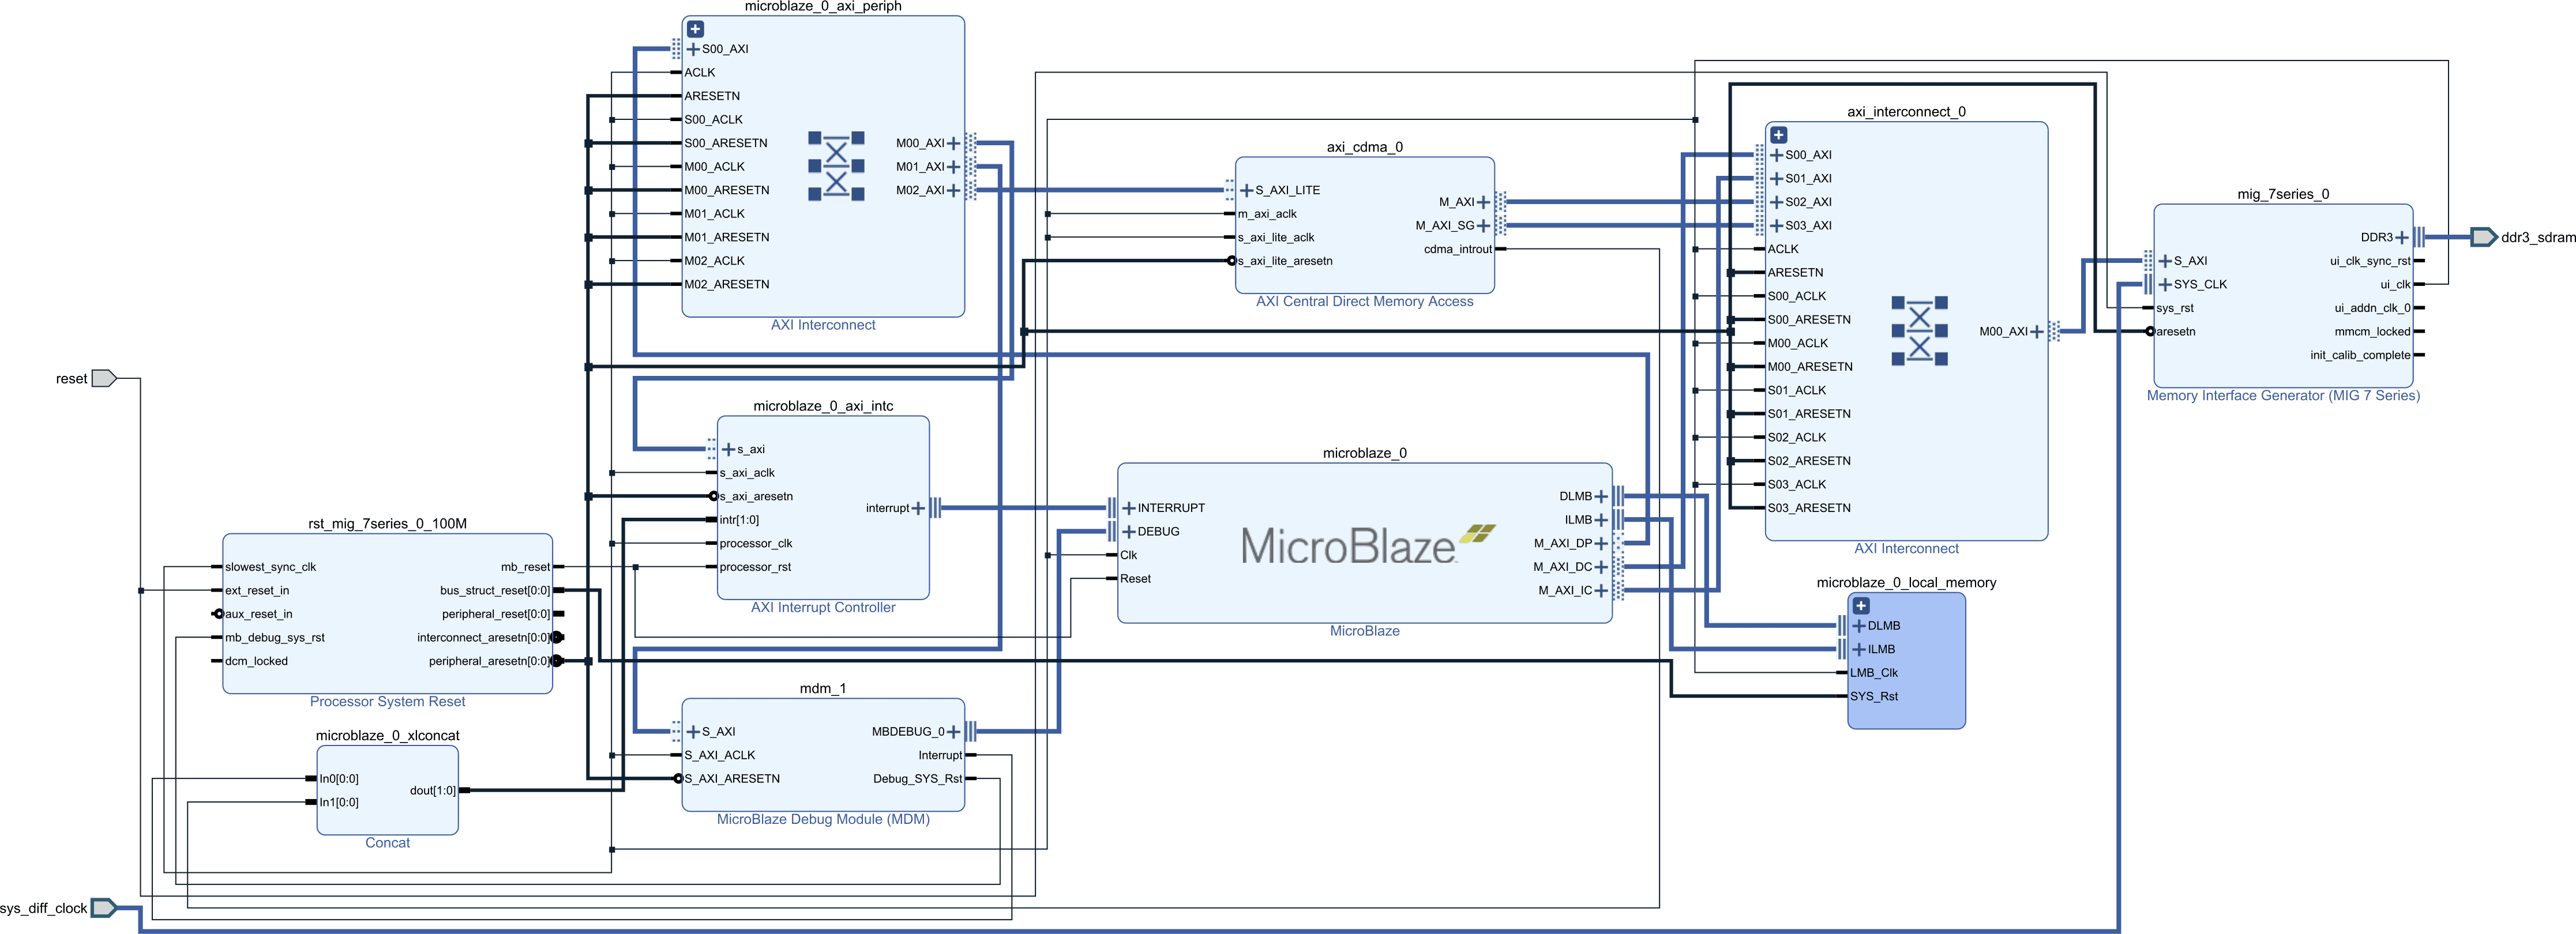 Diagram of a MicroBlaze system sharing access to external SDRAM memory through a common AXI interconnect used by the MicroBlaze and another DMA bus master.